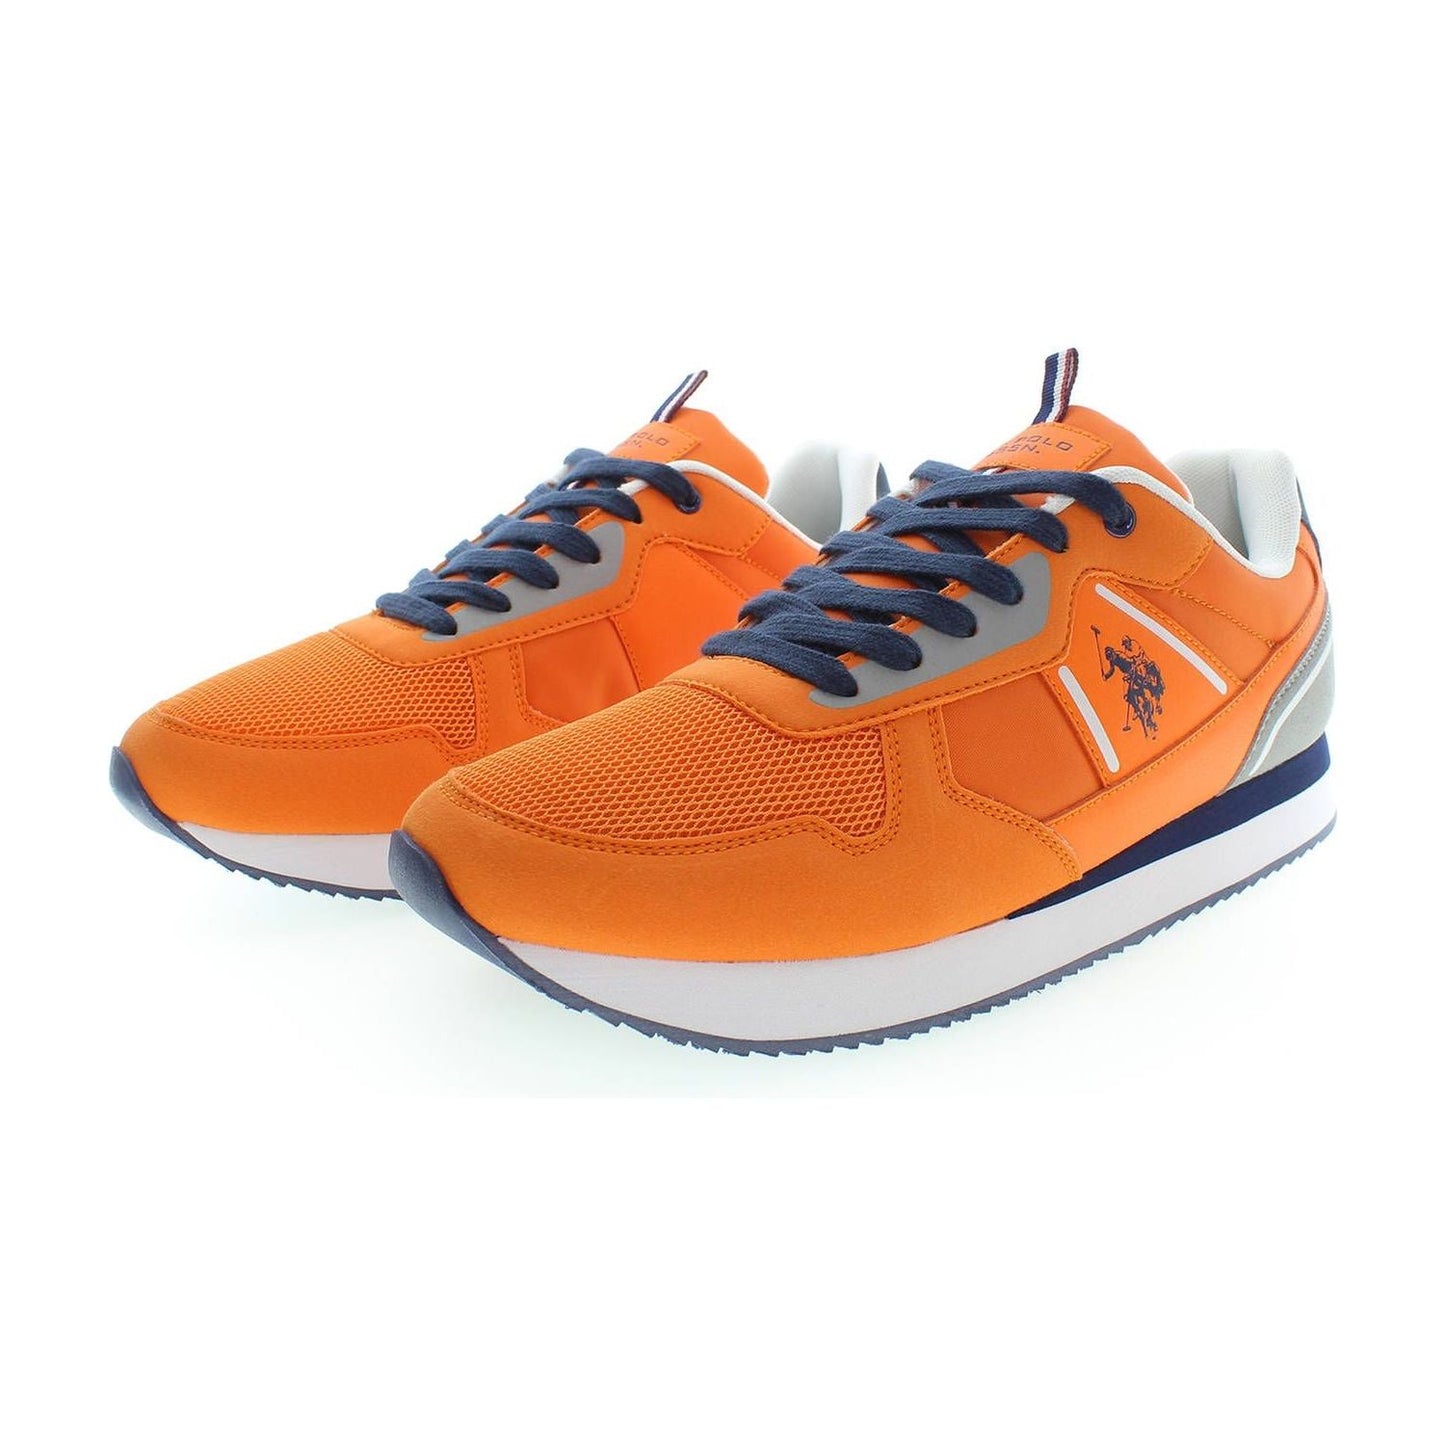 U.S. POLO ASSN.Orange Lace-Up Sports Sneakers with Logo DetailMcRichard Designer Brands£89.00